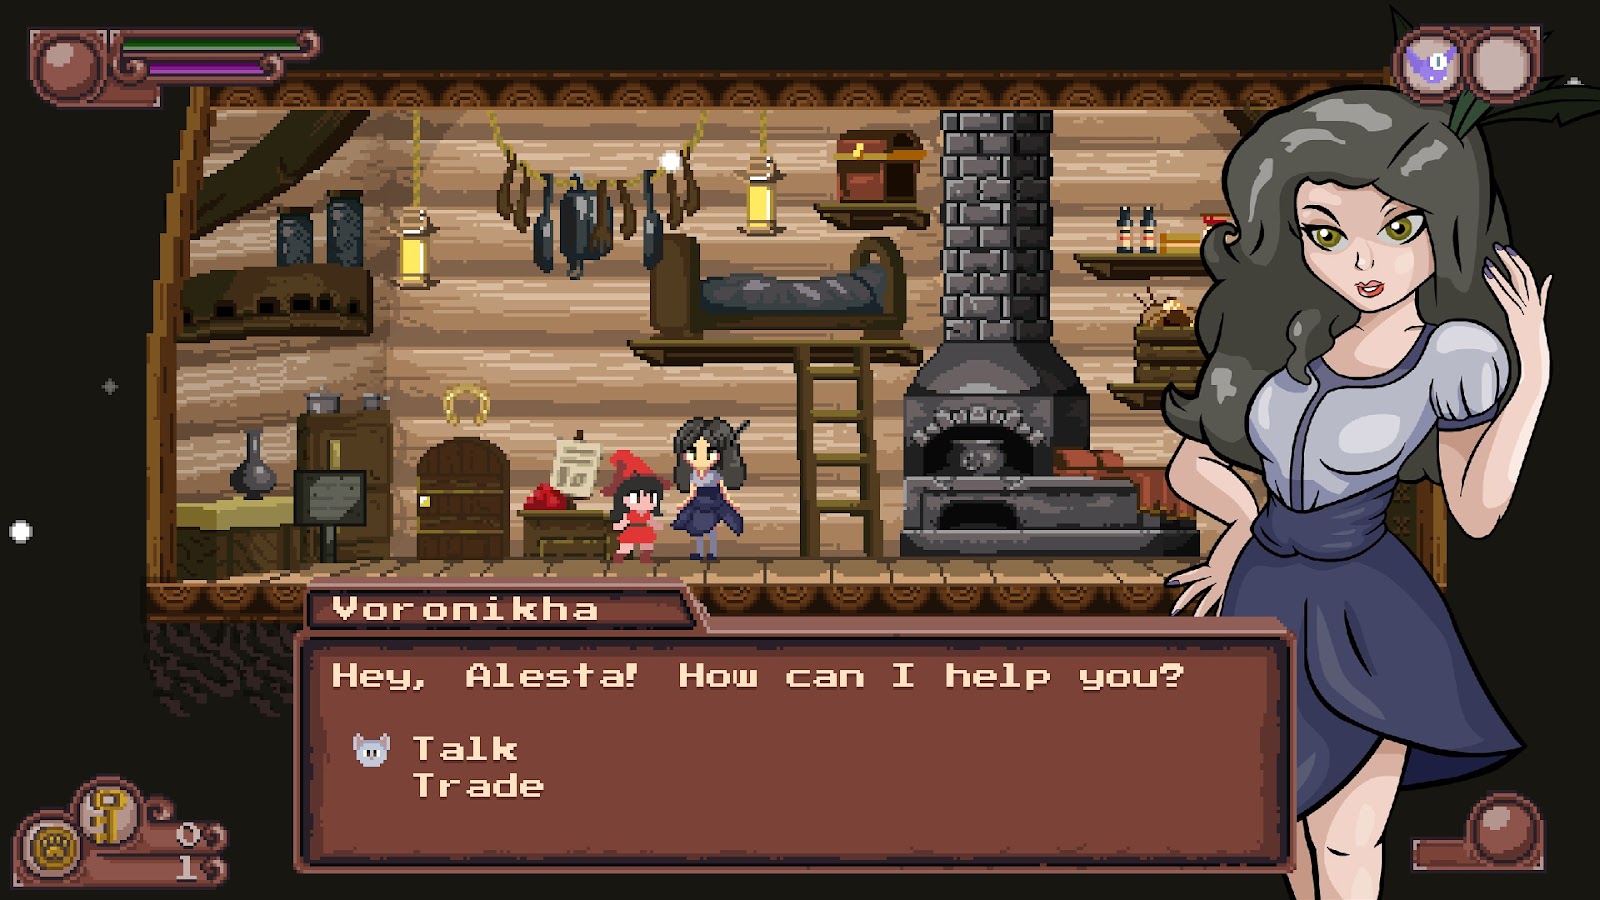 A screenshot showing inside a house, with the witch speaking to a character called Veronikha.